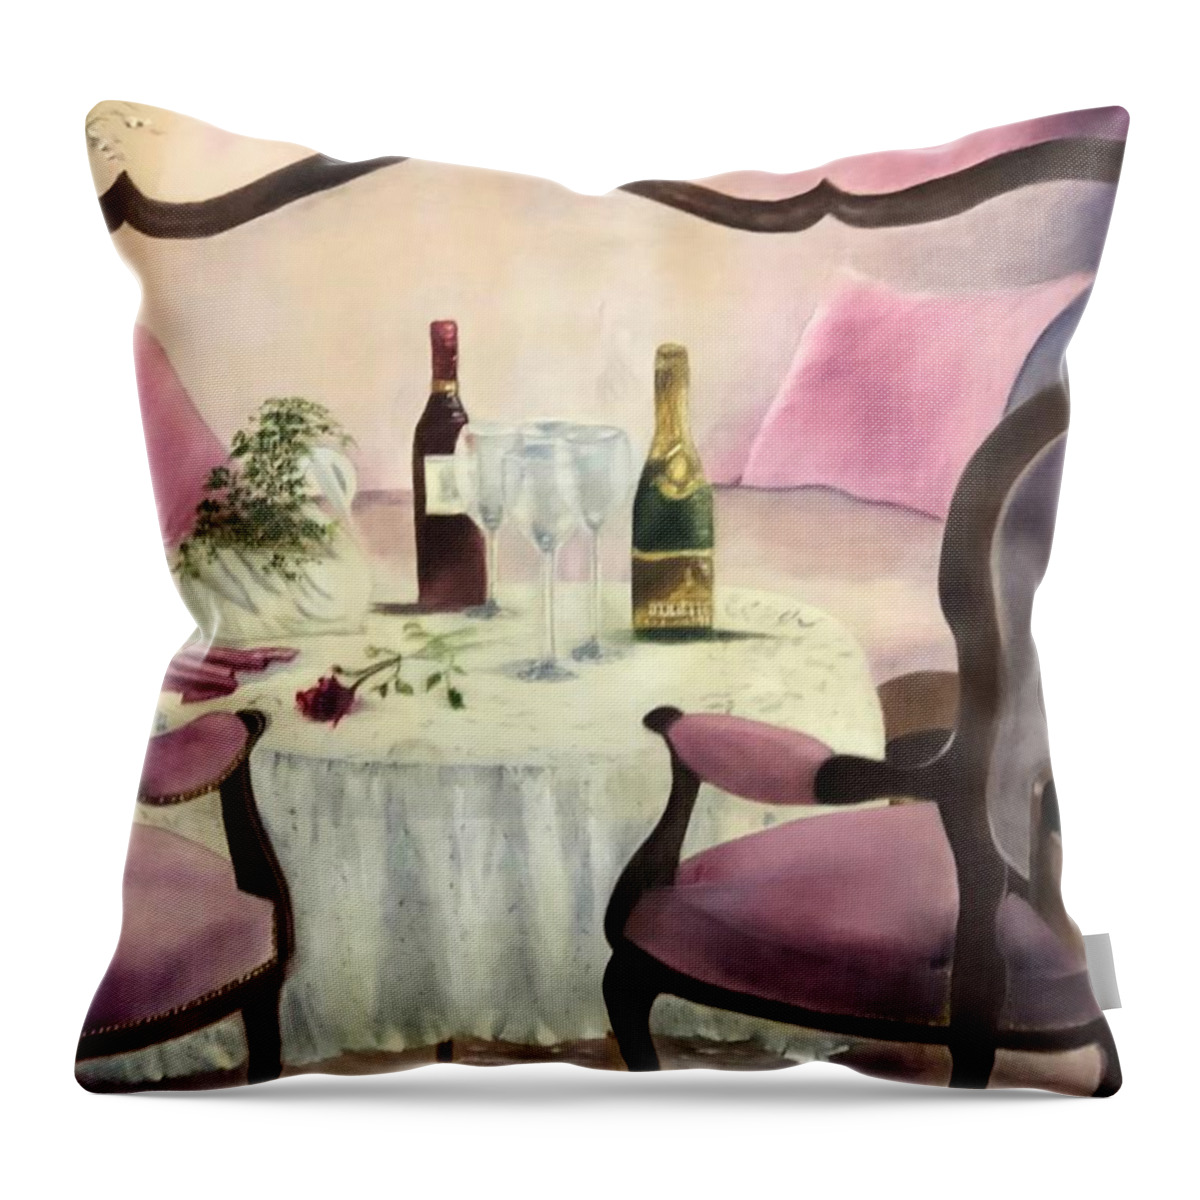 Champagne Throw Pillow featuring the painting Afternoon Delight by Juliette Becker